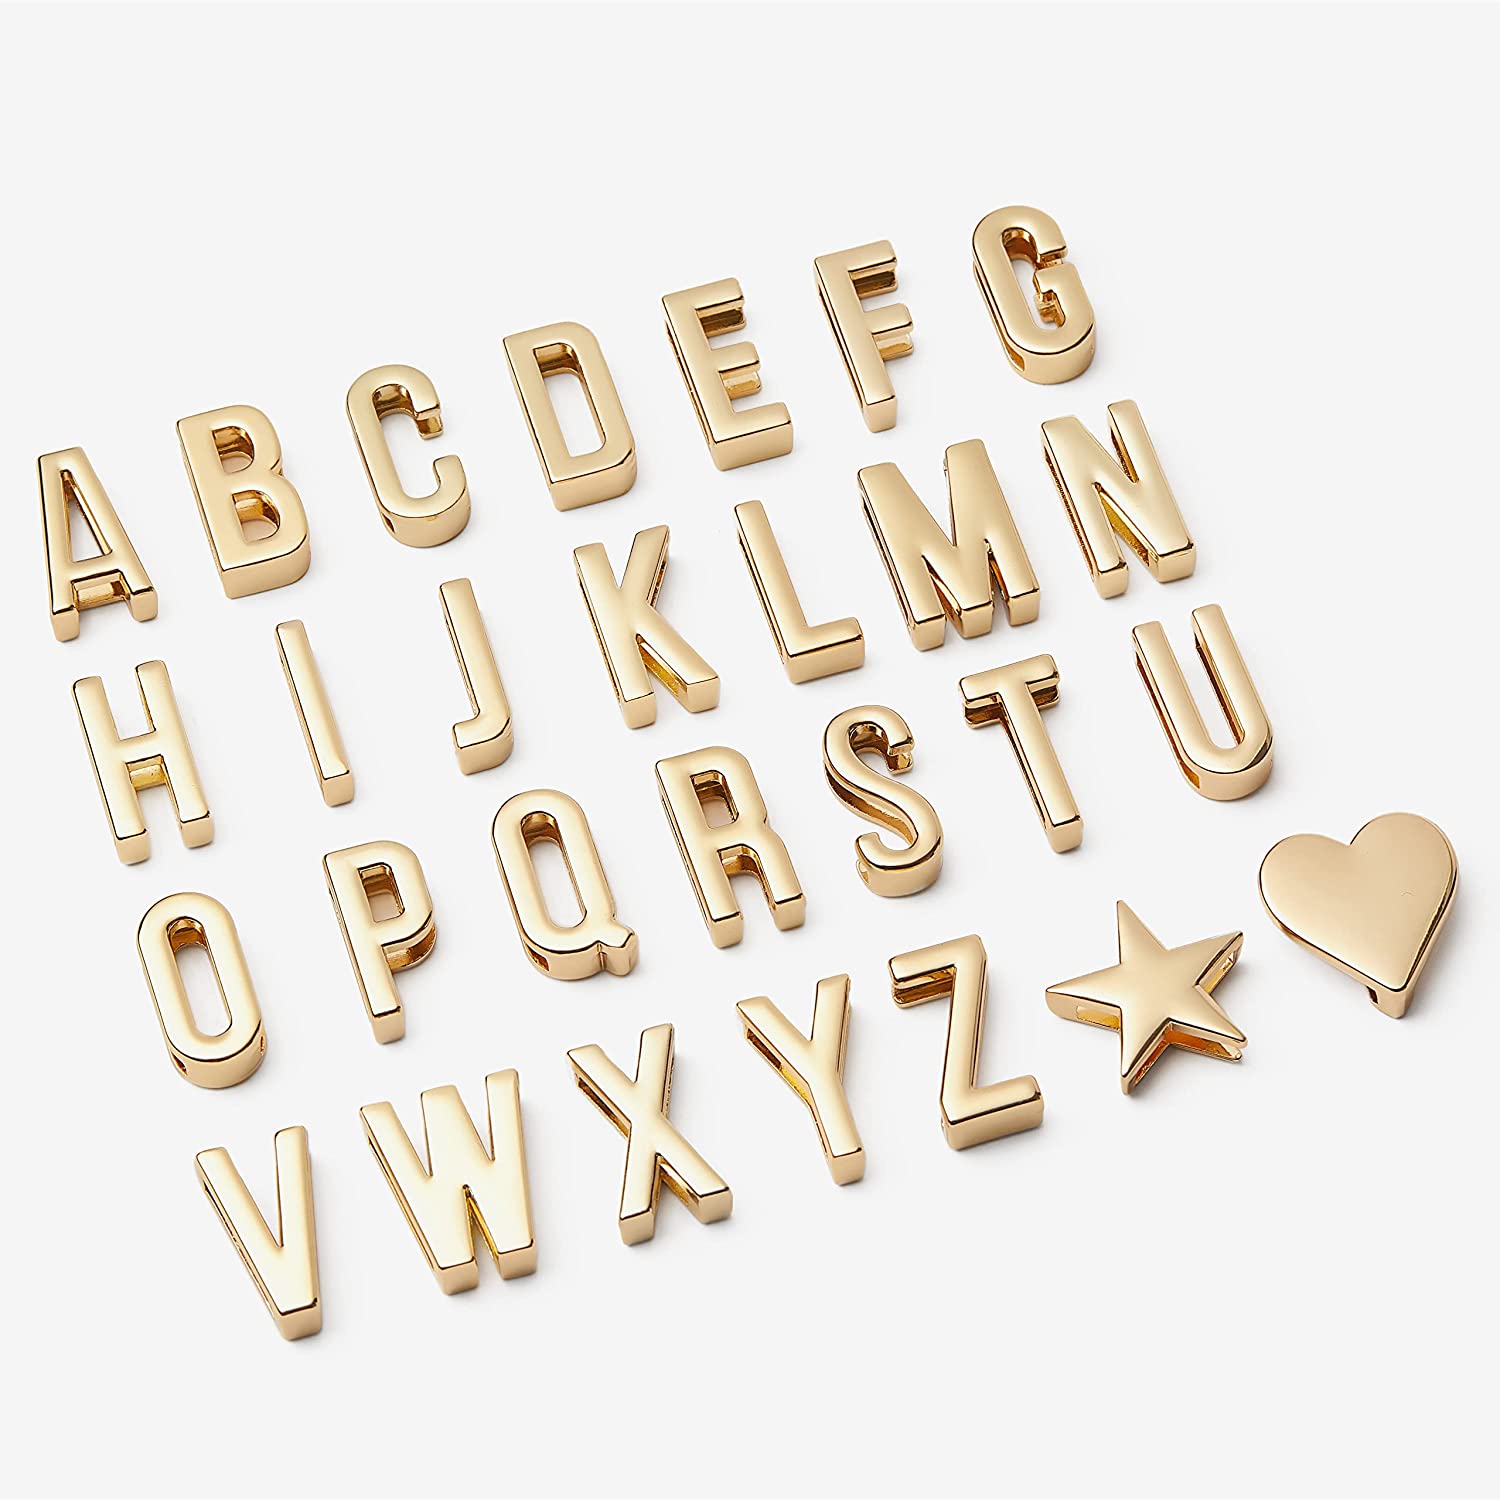 Aylifu Heart Pendant Charms, 40pcs Enamel Love Charms Alloy Heart Shaped Pendants Jewelry Findings Craft Supplies for Necklace Bracelet Keychain